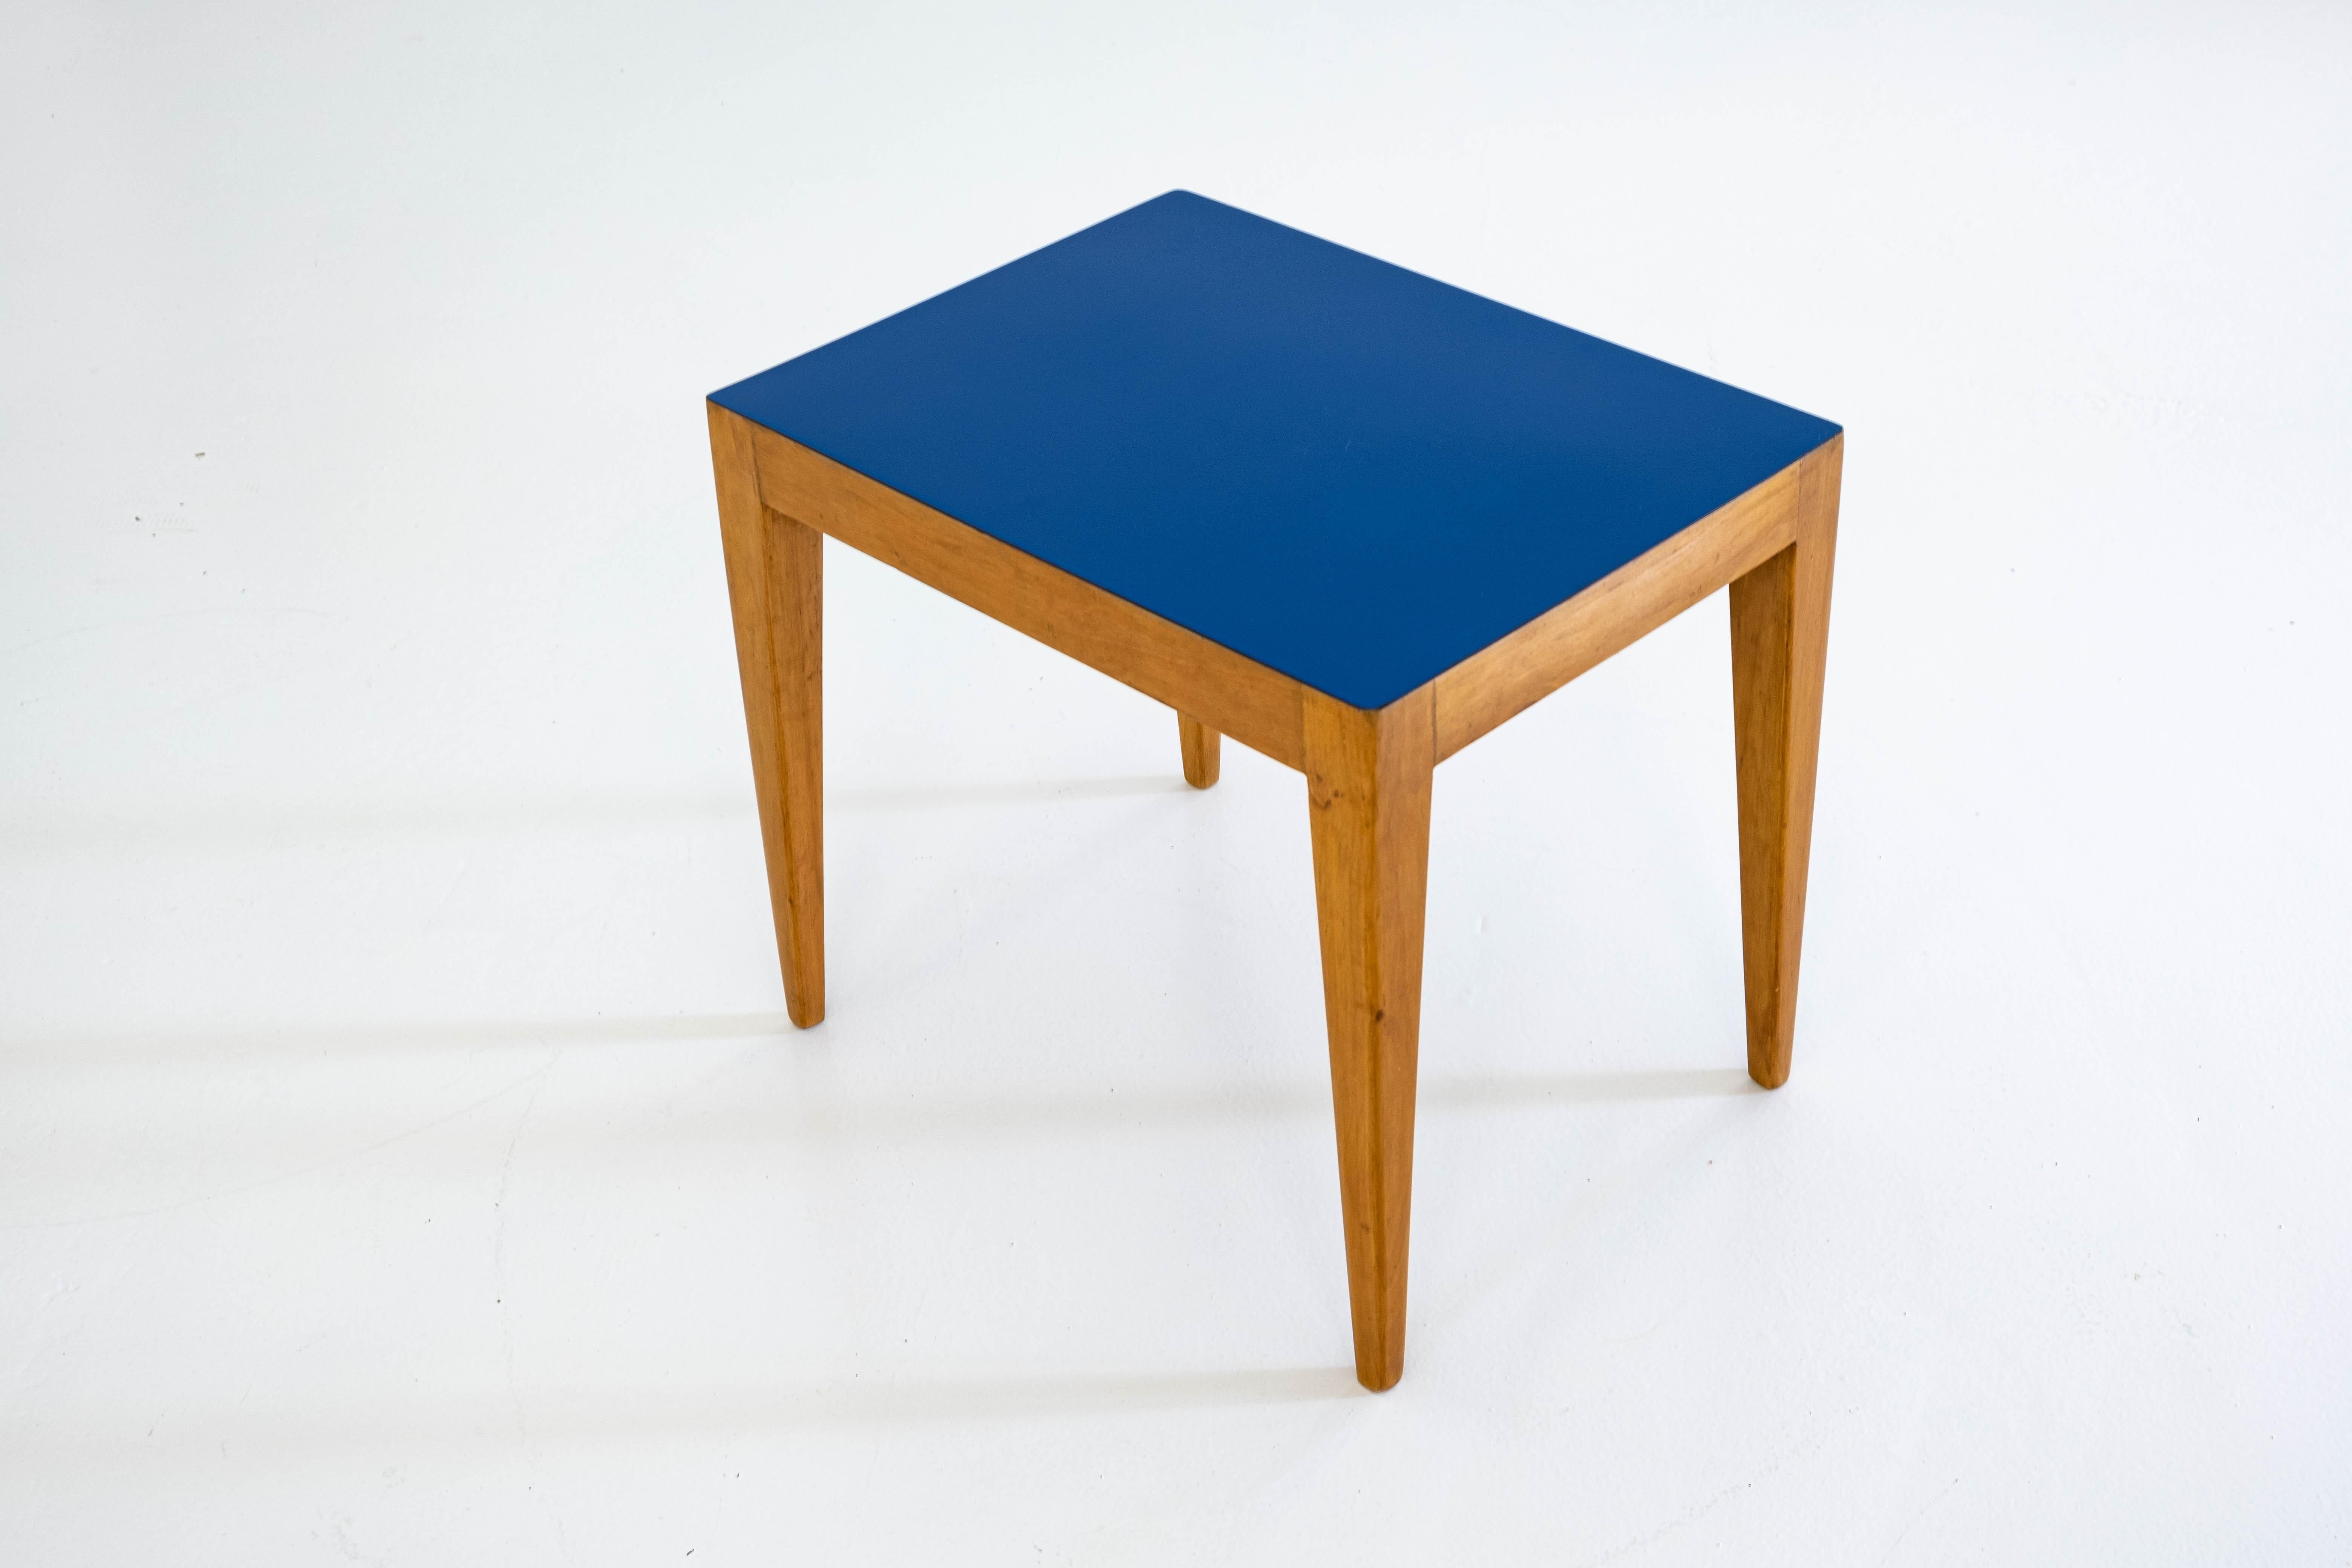 A simple and puristic small side table in ash with a blue laminate top, in very good vintage condition (which shows some super fine scratch marks). Origin: Italy, probably 1960’s.